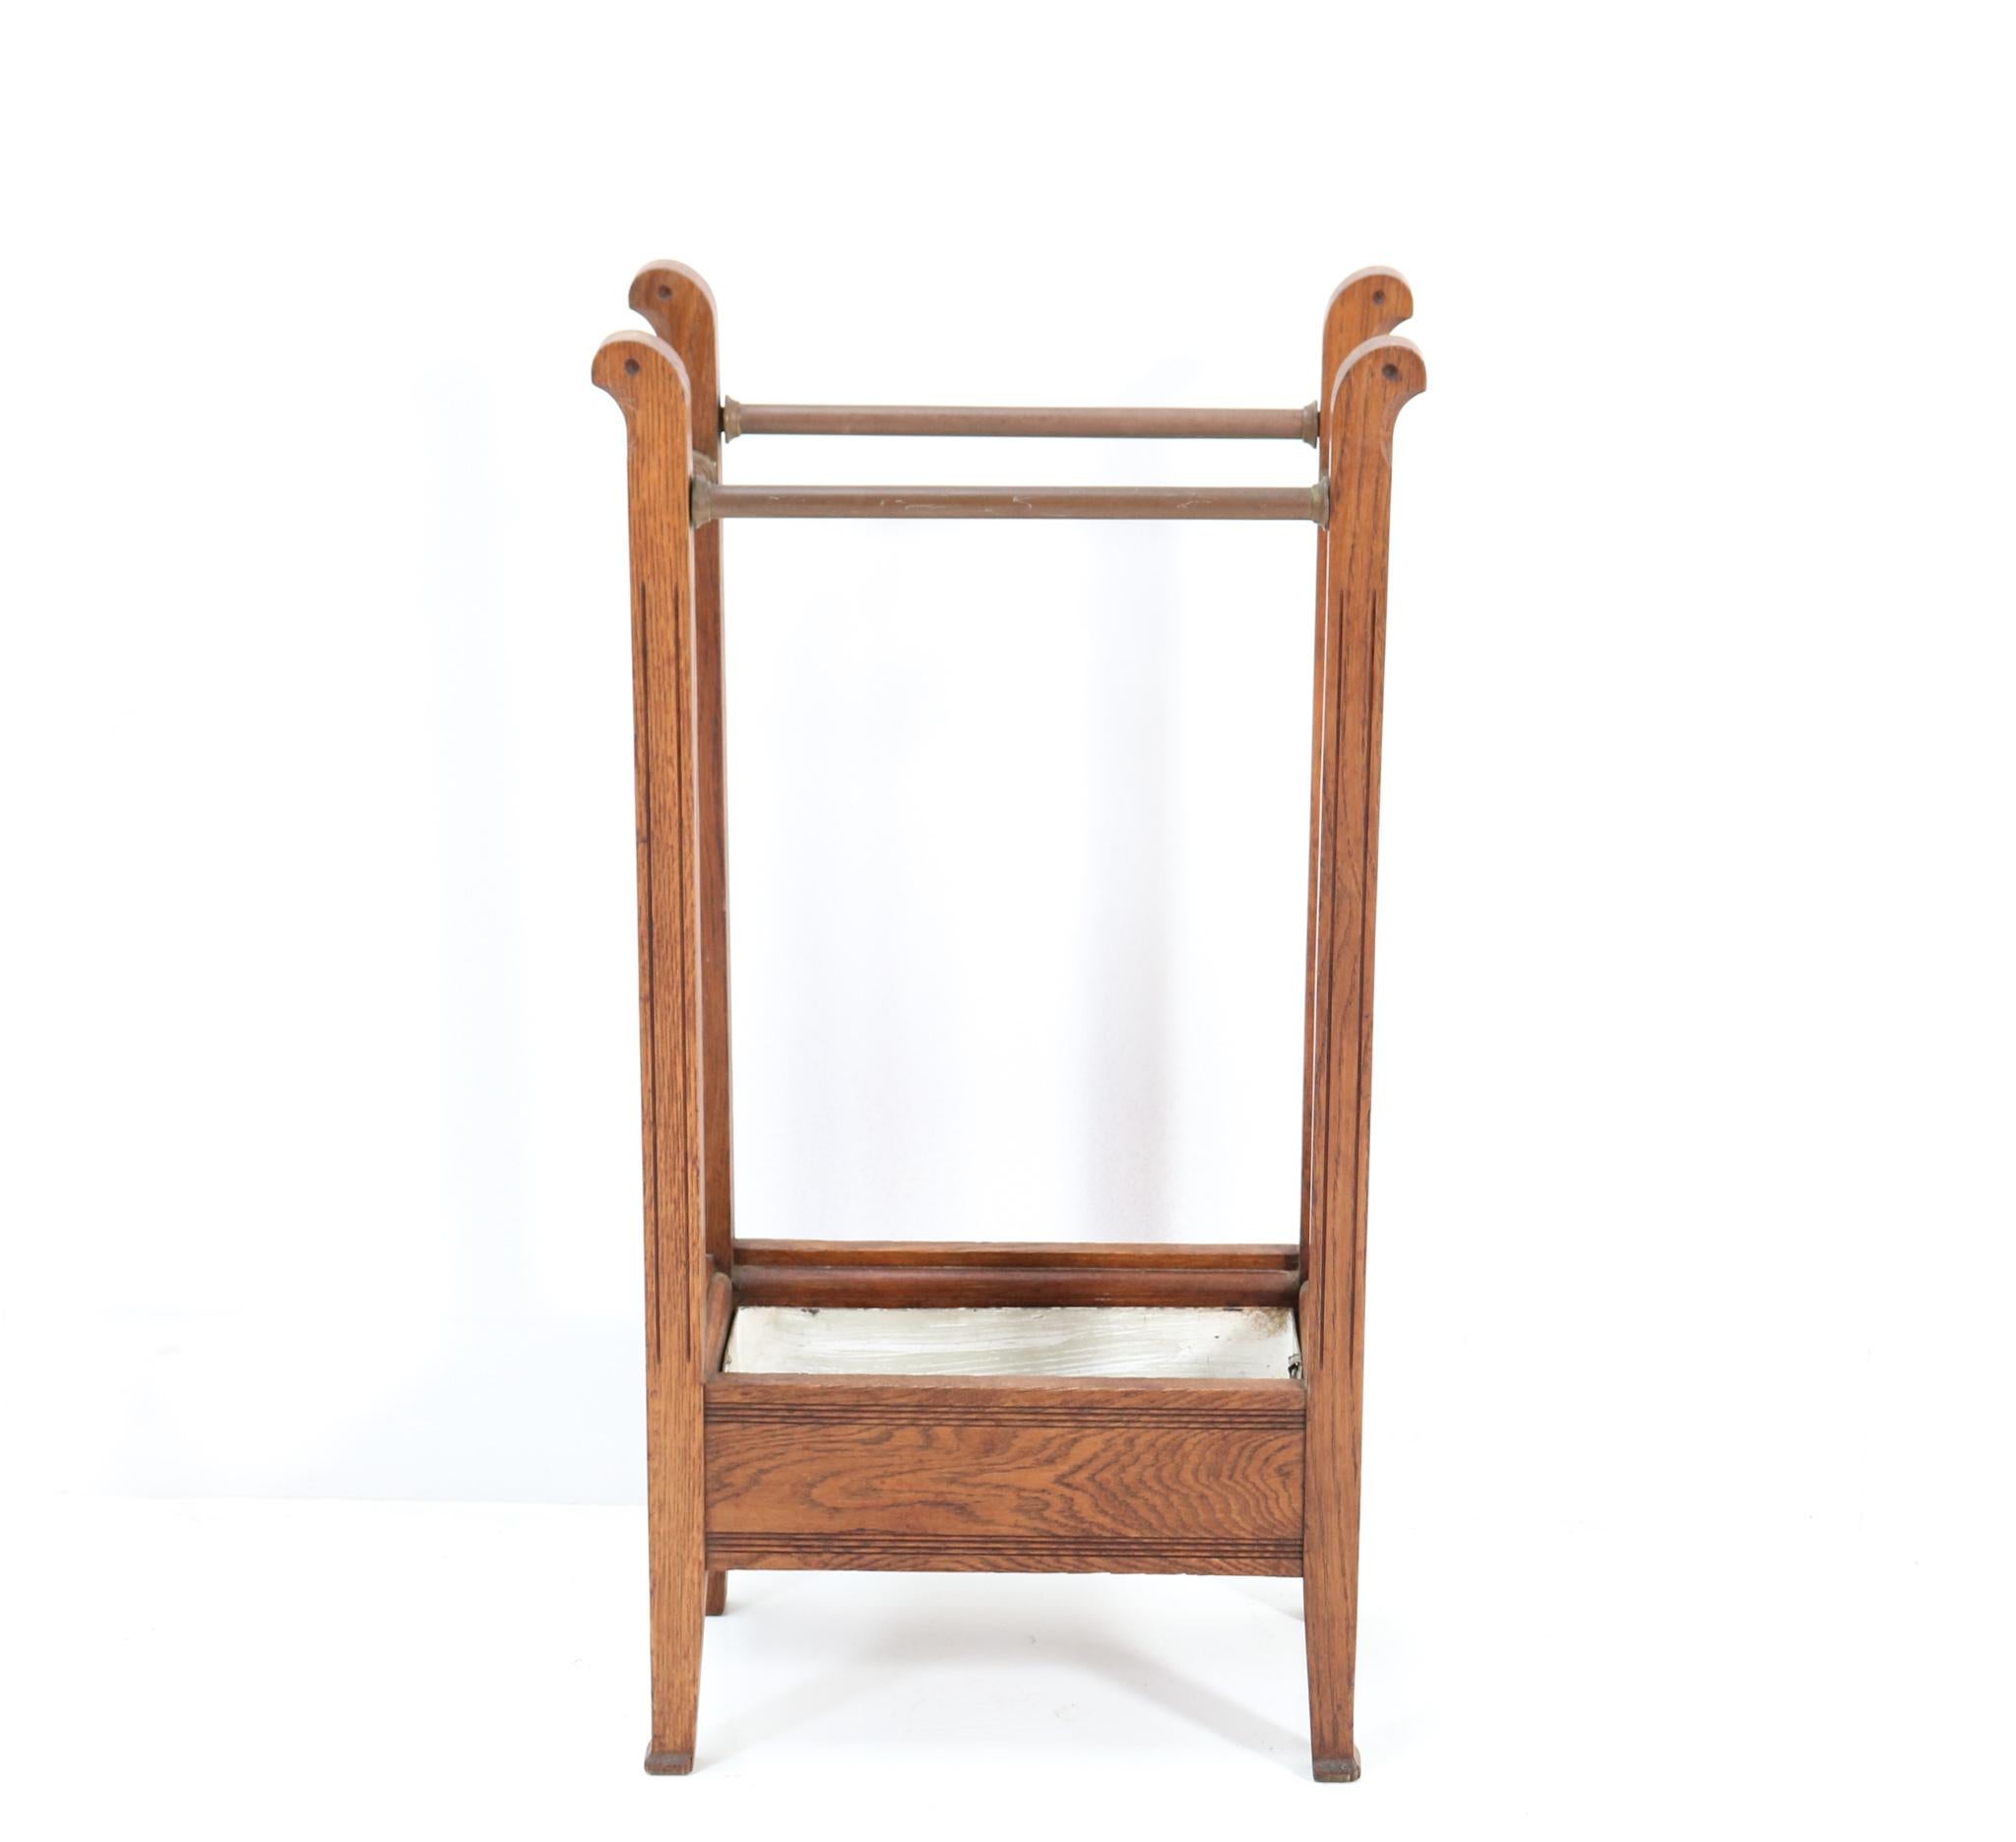 Stunning and rare Art Nouveau Arts & Crafts umbrella stand.
Striking Dutch design from the 1900s.
Solid oak frame with original patinated brass bars for holding
the umbrellas.
Original patinated sink reservoir.
In very good condition with a